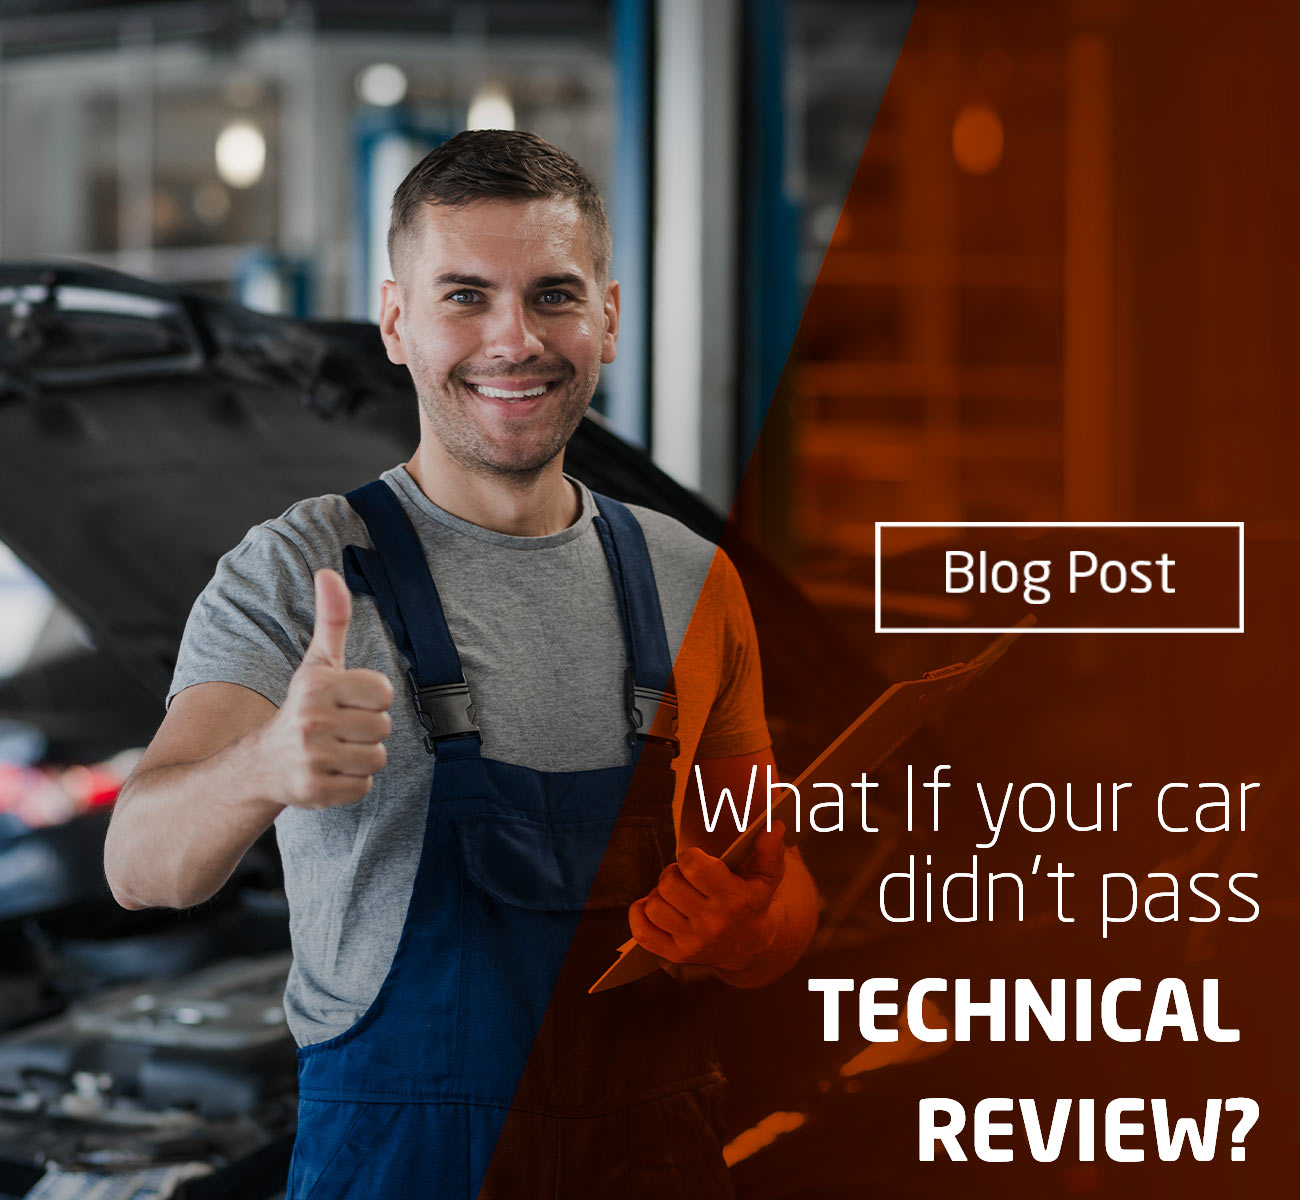 What would happen If your car didn’t pass technical review?